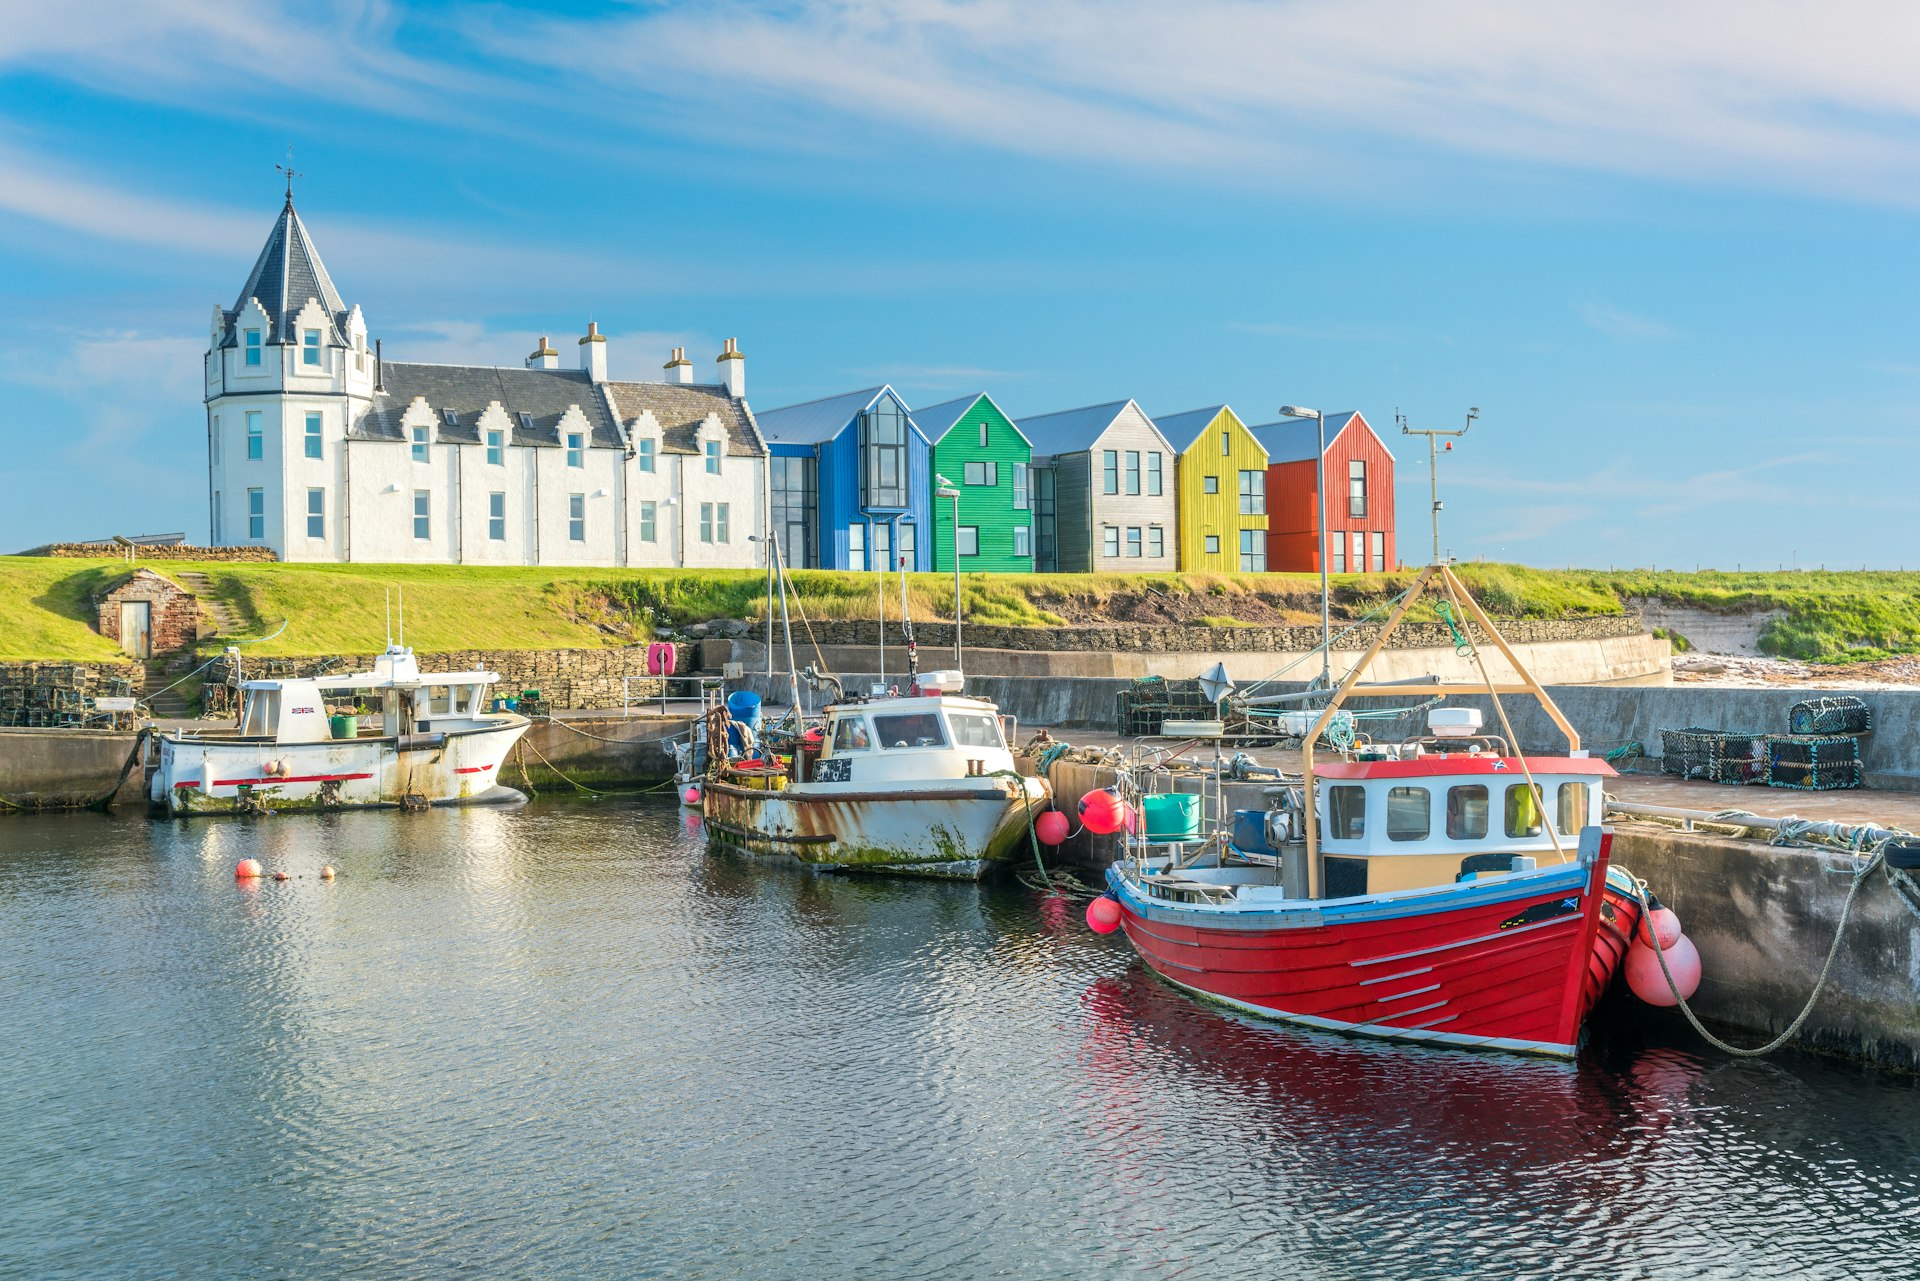 The colorful buildings of John O’Groats in a sunny afternoon, Caithness county, Scotland